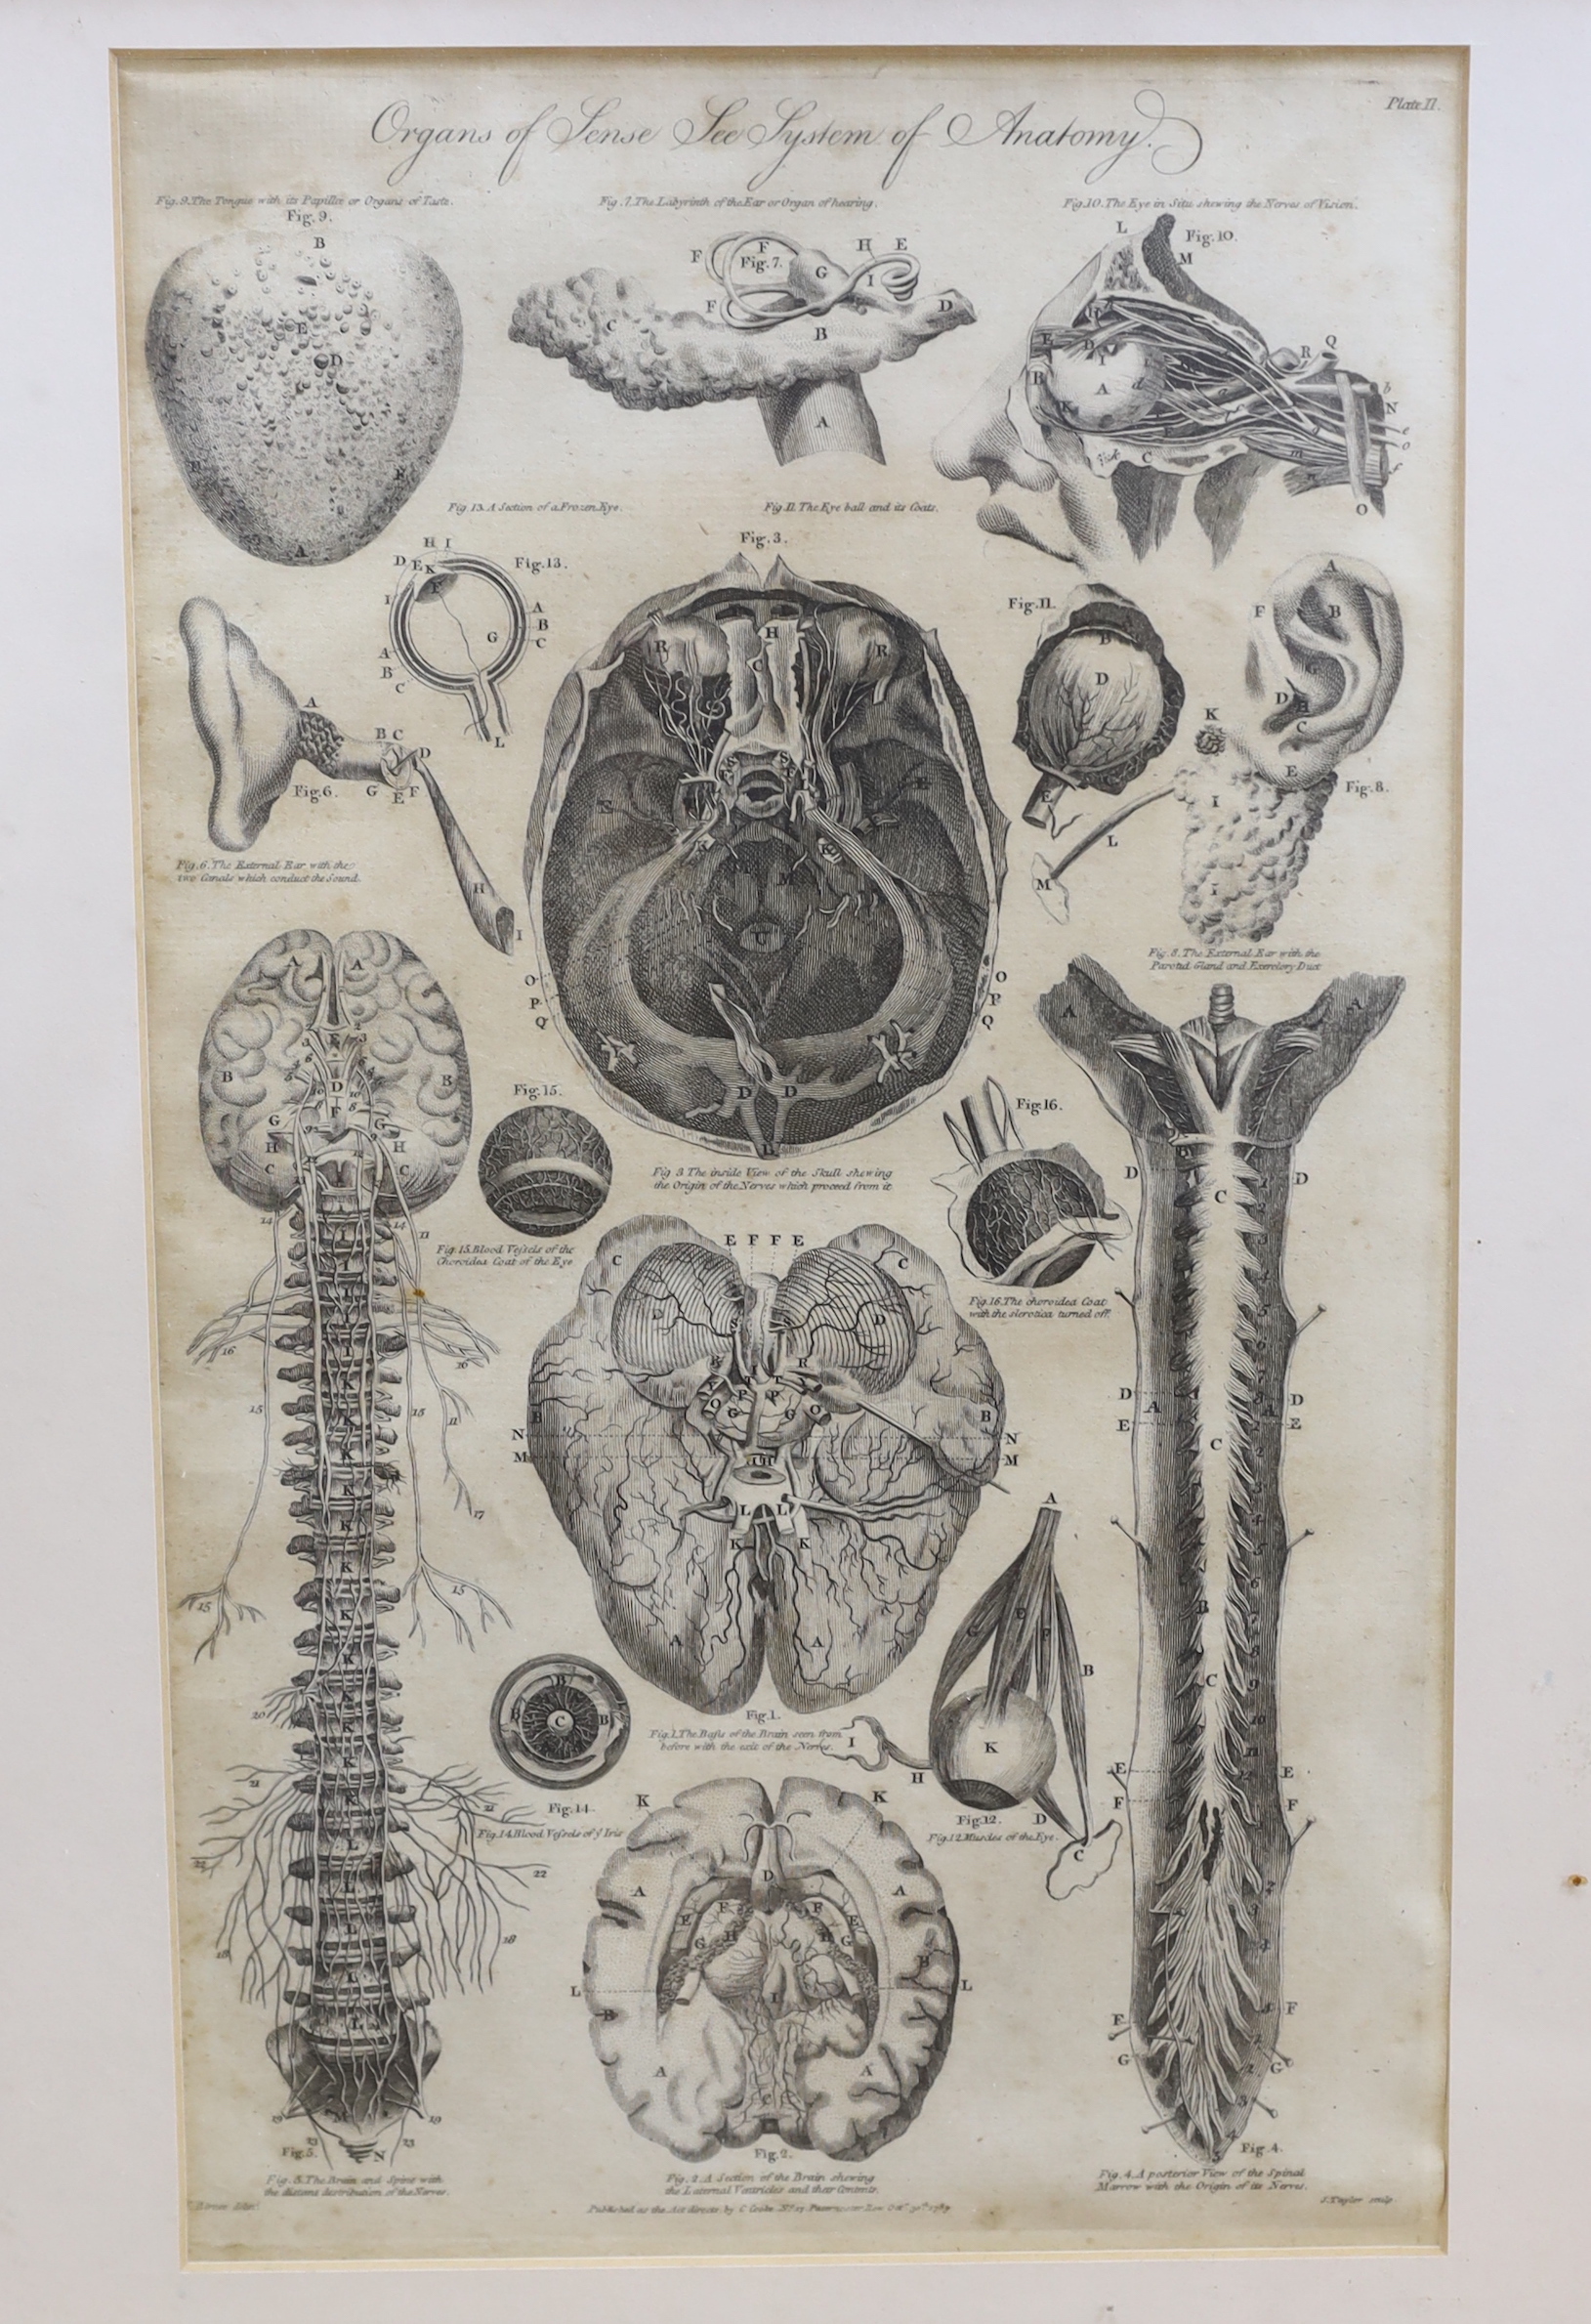 Six medical and anatomical 18th century engravings, including arteries with the muscles on the right side of the body and organs of sense, see, system of the anatomy, publ. by C. Cooke, various dates, each 36 x 21cm